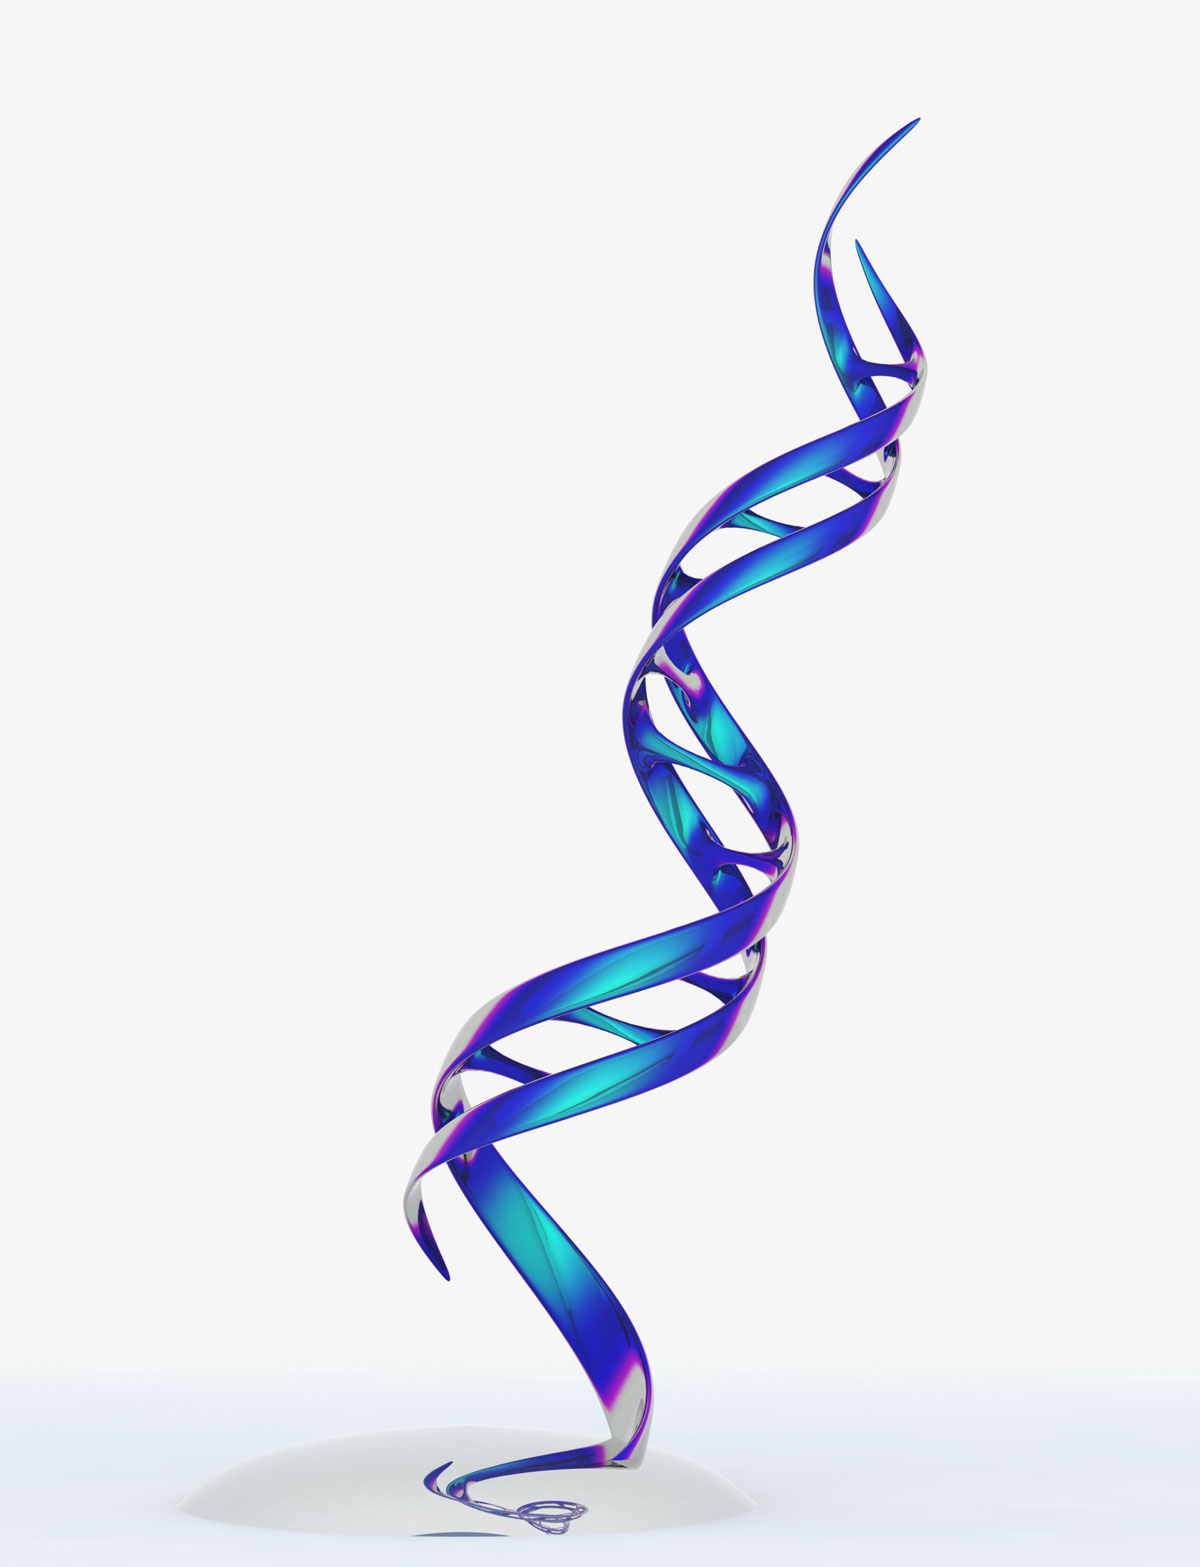 For Dna Double Helix Art Displaying Image